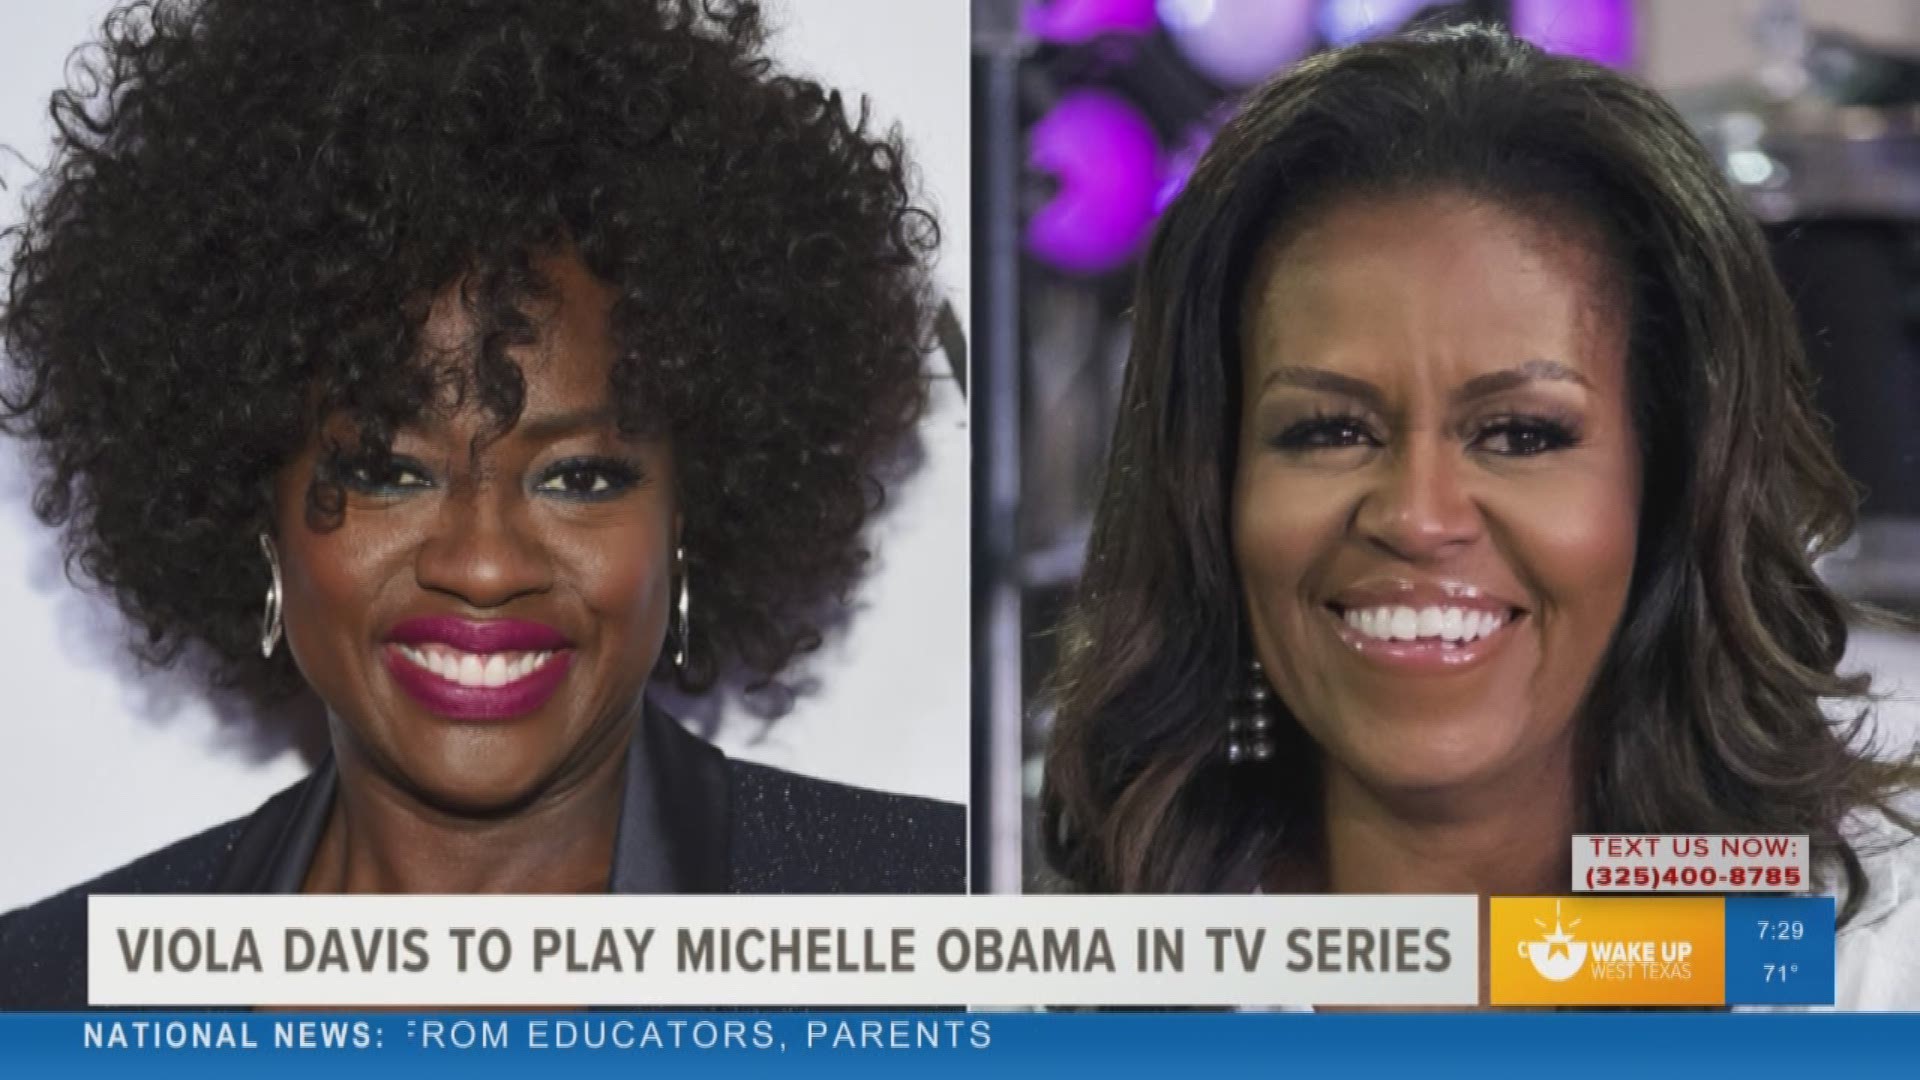 Our Malik Mingo shared what people said on social media about Viola Davis being cast as Michelle Obama in an upcoming drama series on Showtime about first ladies.